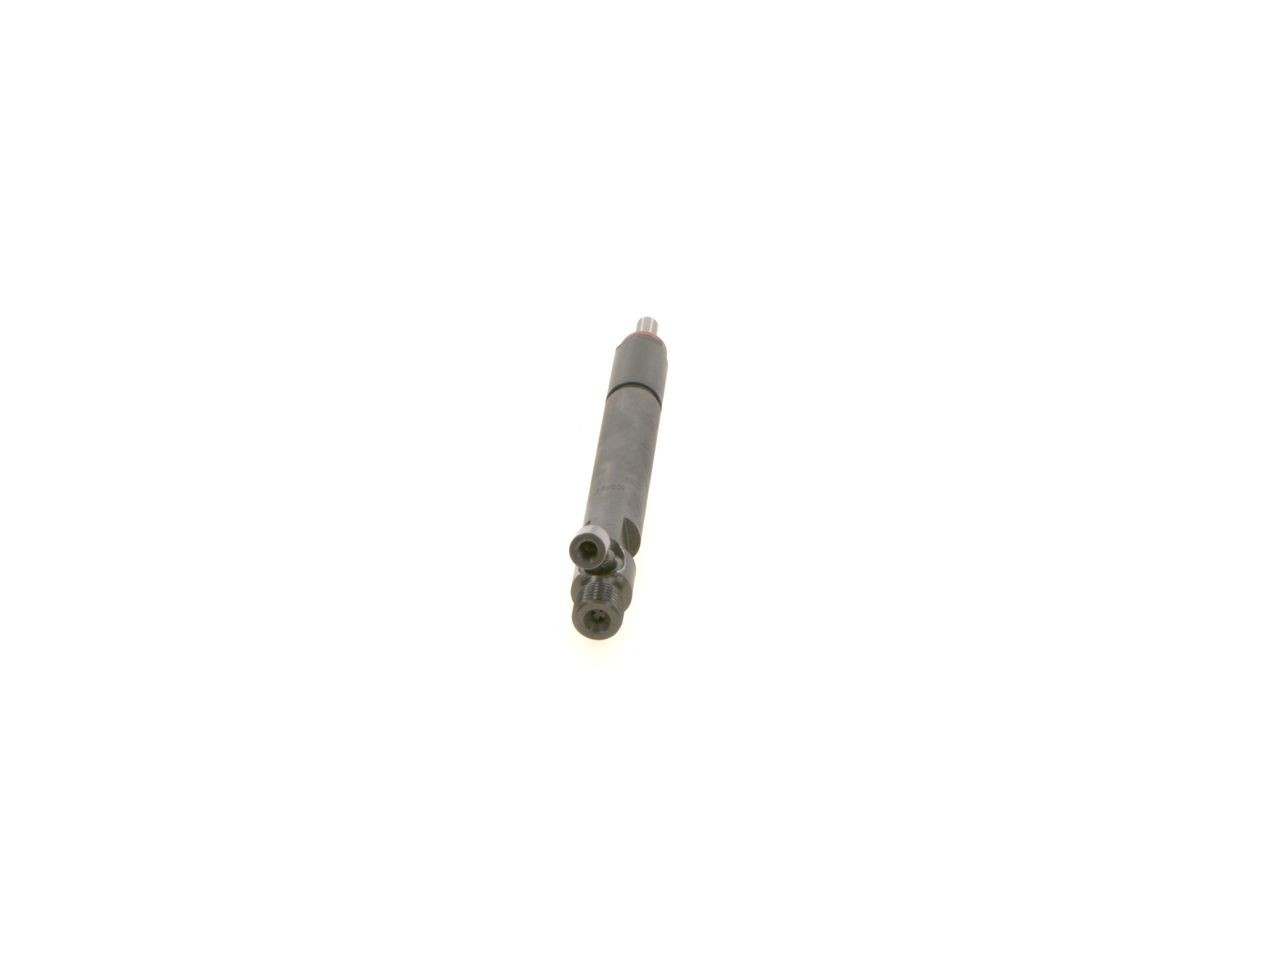 BOSCH 0 432 191 601 Nozzle and Holder Assembly